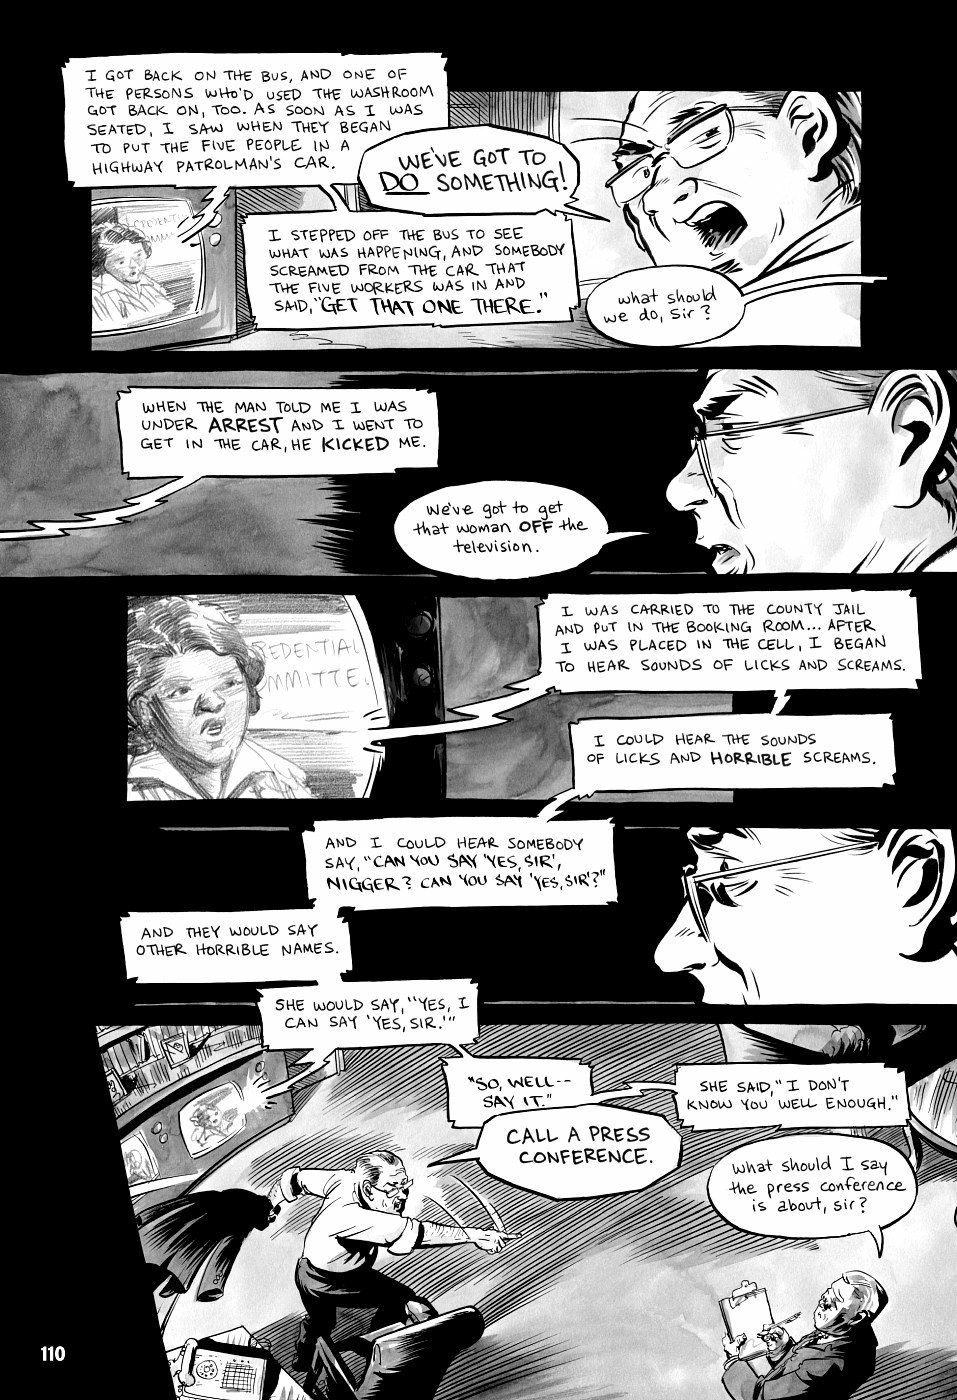 page 110 of march book three graphic novel